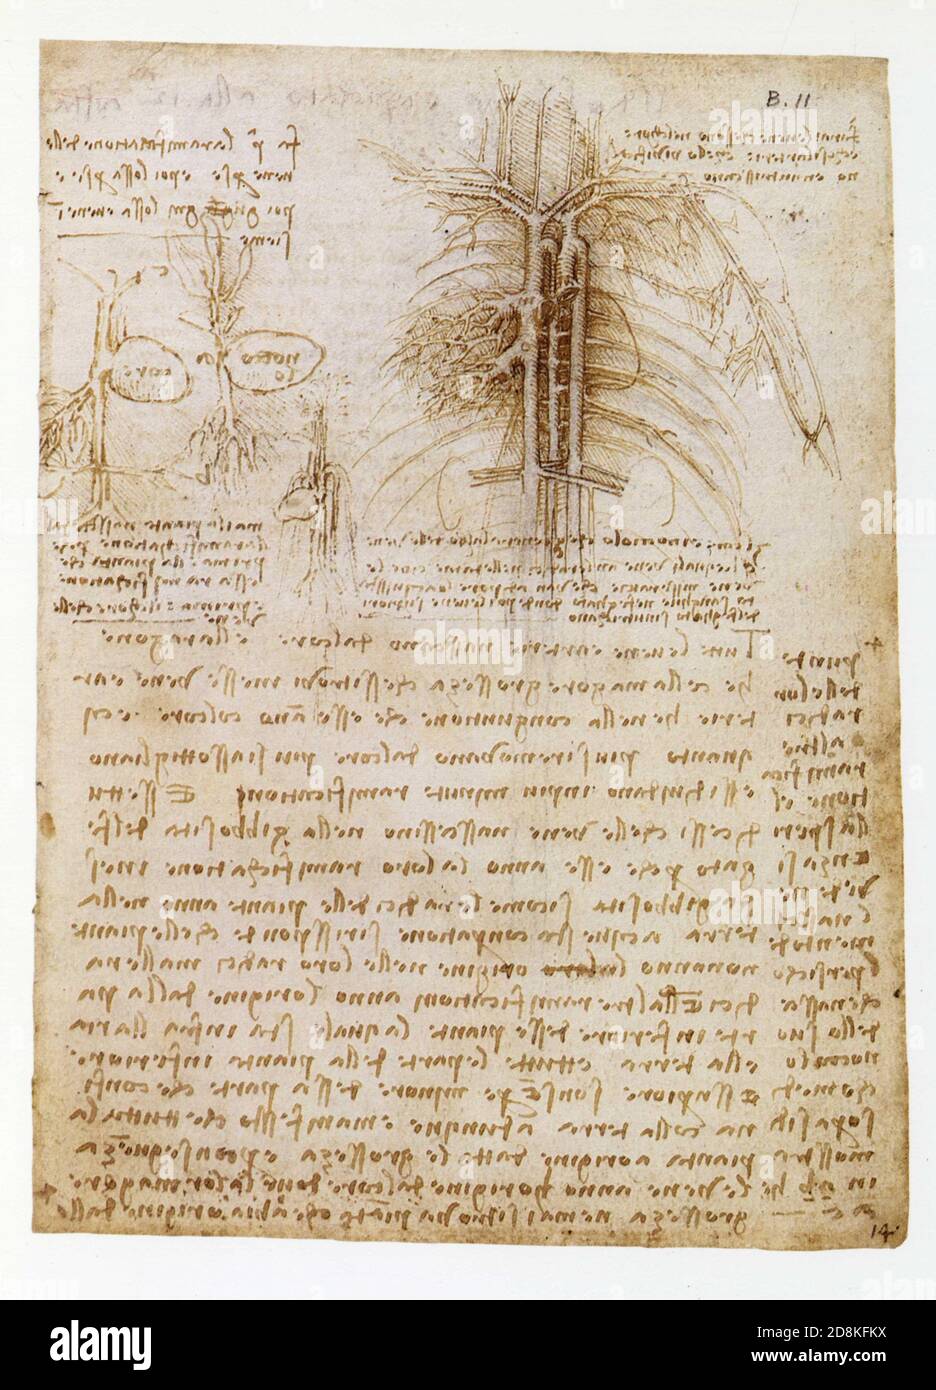 Leonardo da Vinci.The main arteries and veins of the thorax and studies of the heart and blood vessels compared with a plant sprouting from a seed Stock Photo